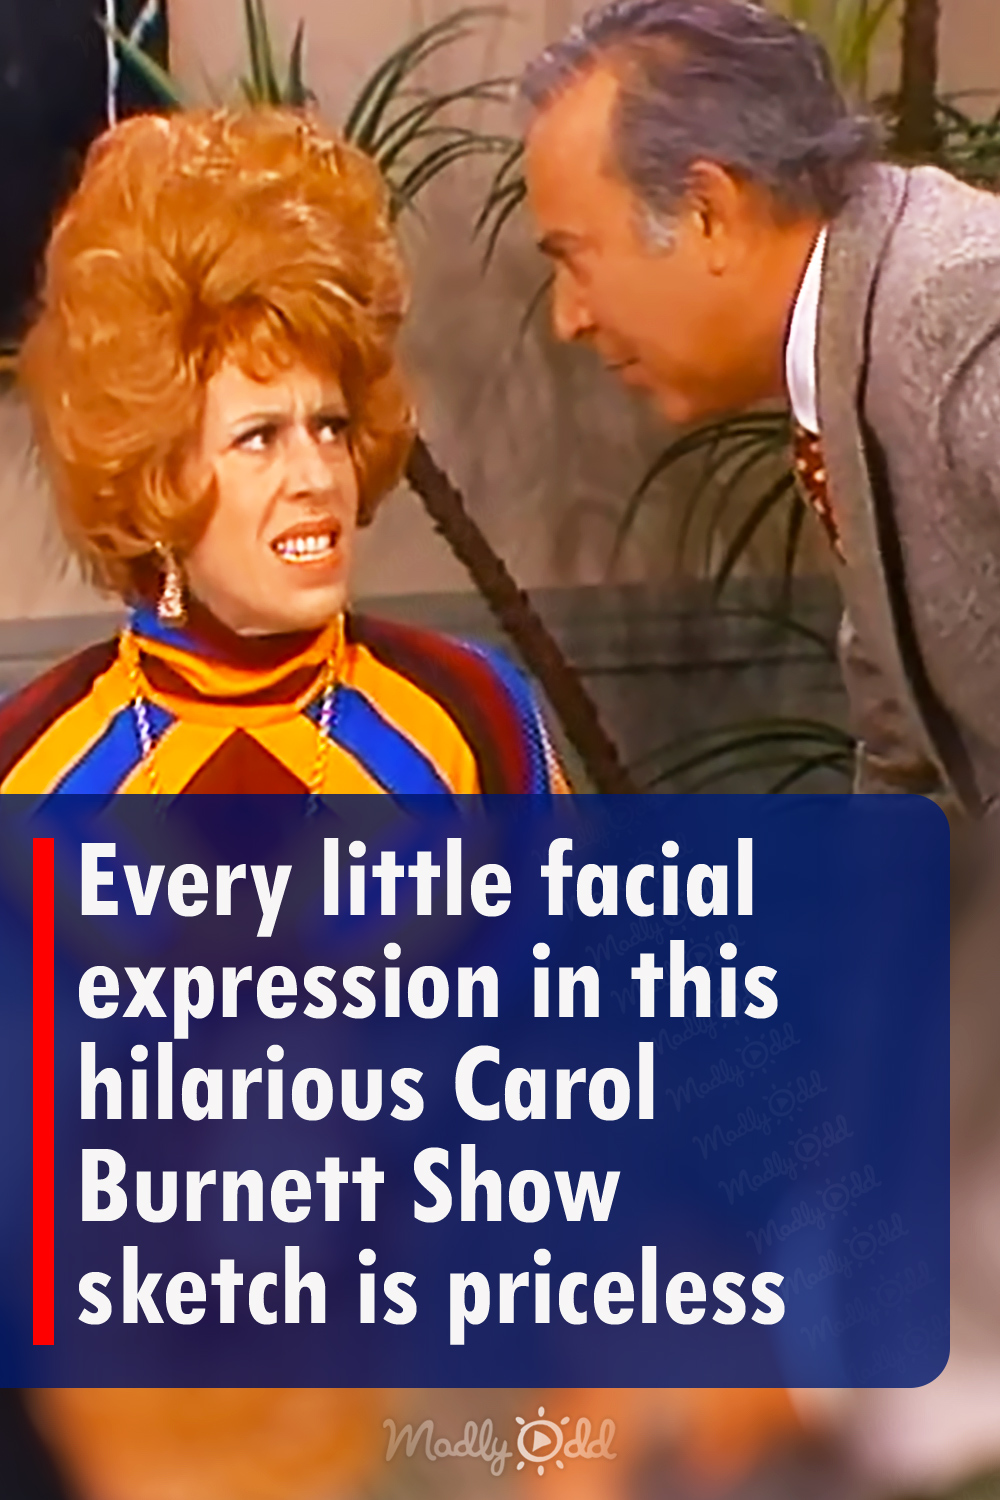 Every little facial expression in this hilarious Carol Burnett Show sketch is priceless